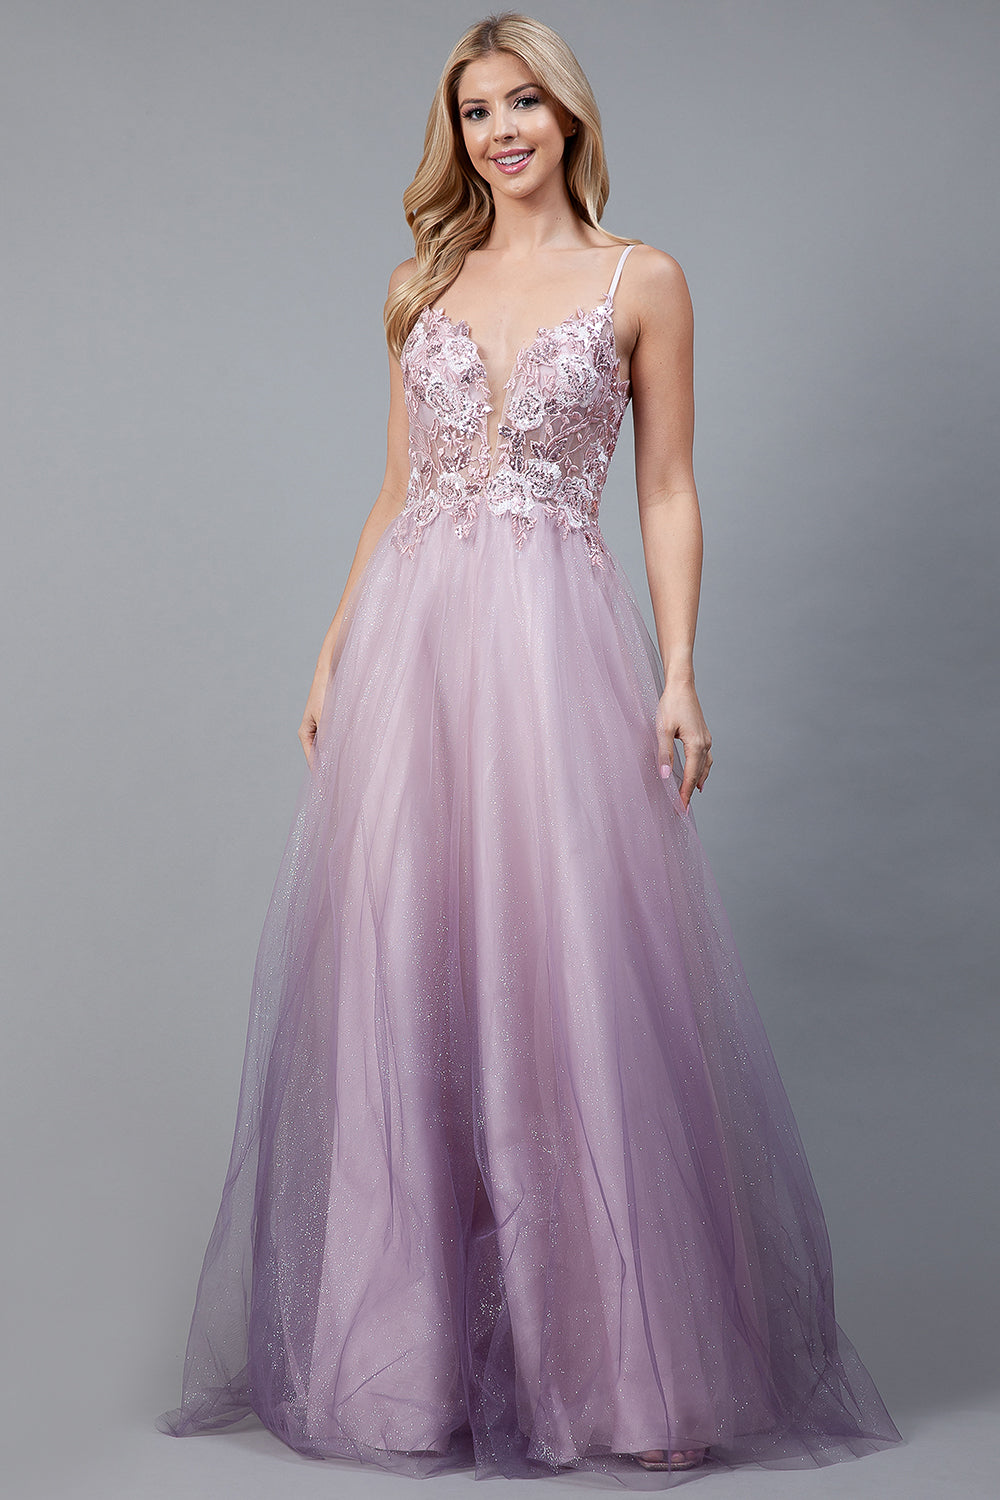 AC 5040 - A-Line Layered Satin Tulle with Floral Embroidered Sheer Bodice Prom Dress Amelia Couture 2 ROSE 